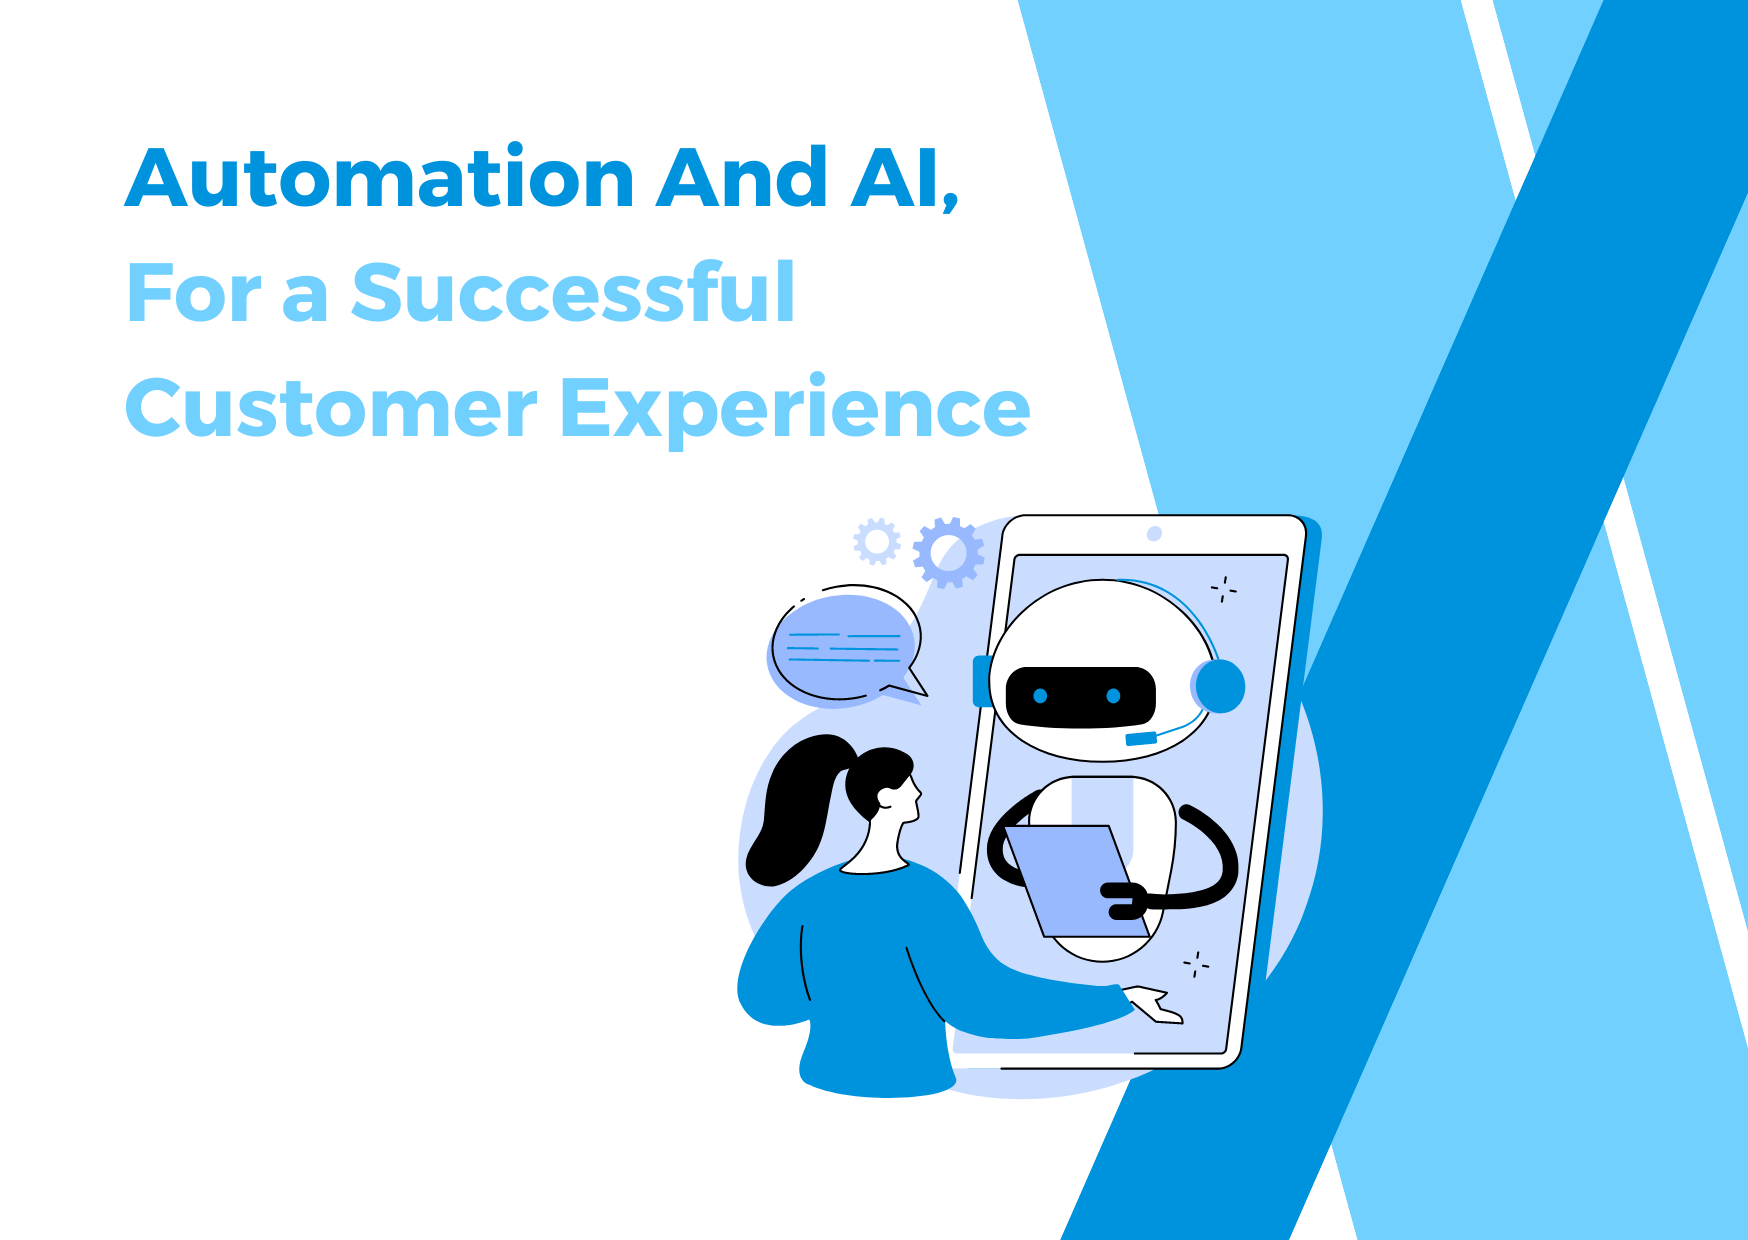 Use Automations and AI for Pre-sales Engagement